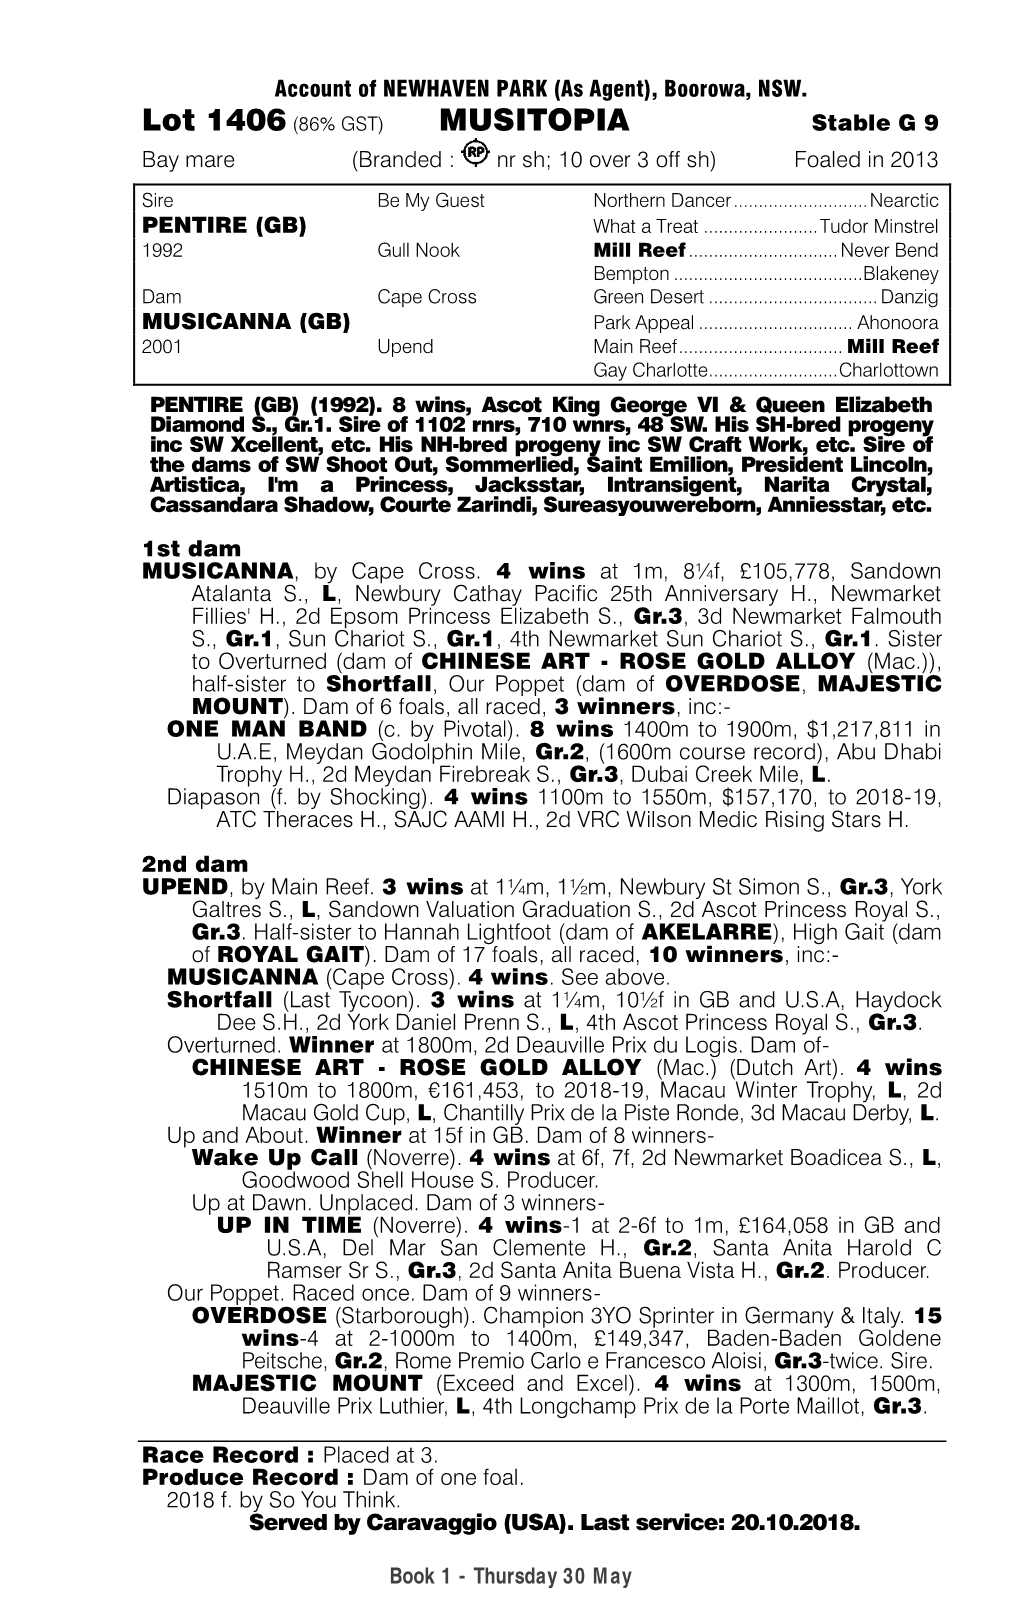 Lot 1406 (86% GST) MUSITOPIA Stable G 9 Bay Mare (Branded : Nr Sh; 10 Over 3 Off Sh) Foaled in 2013